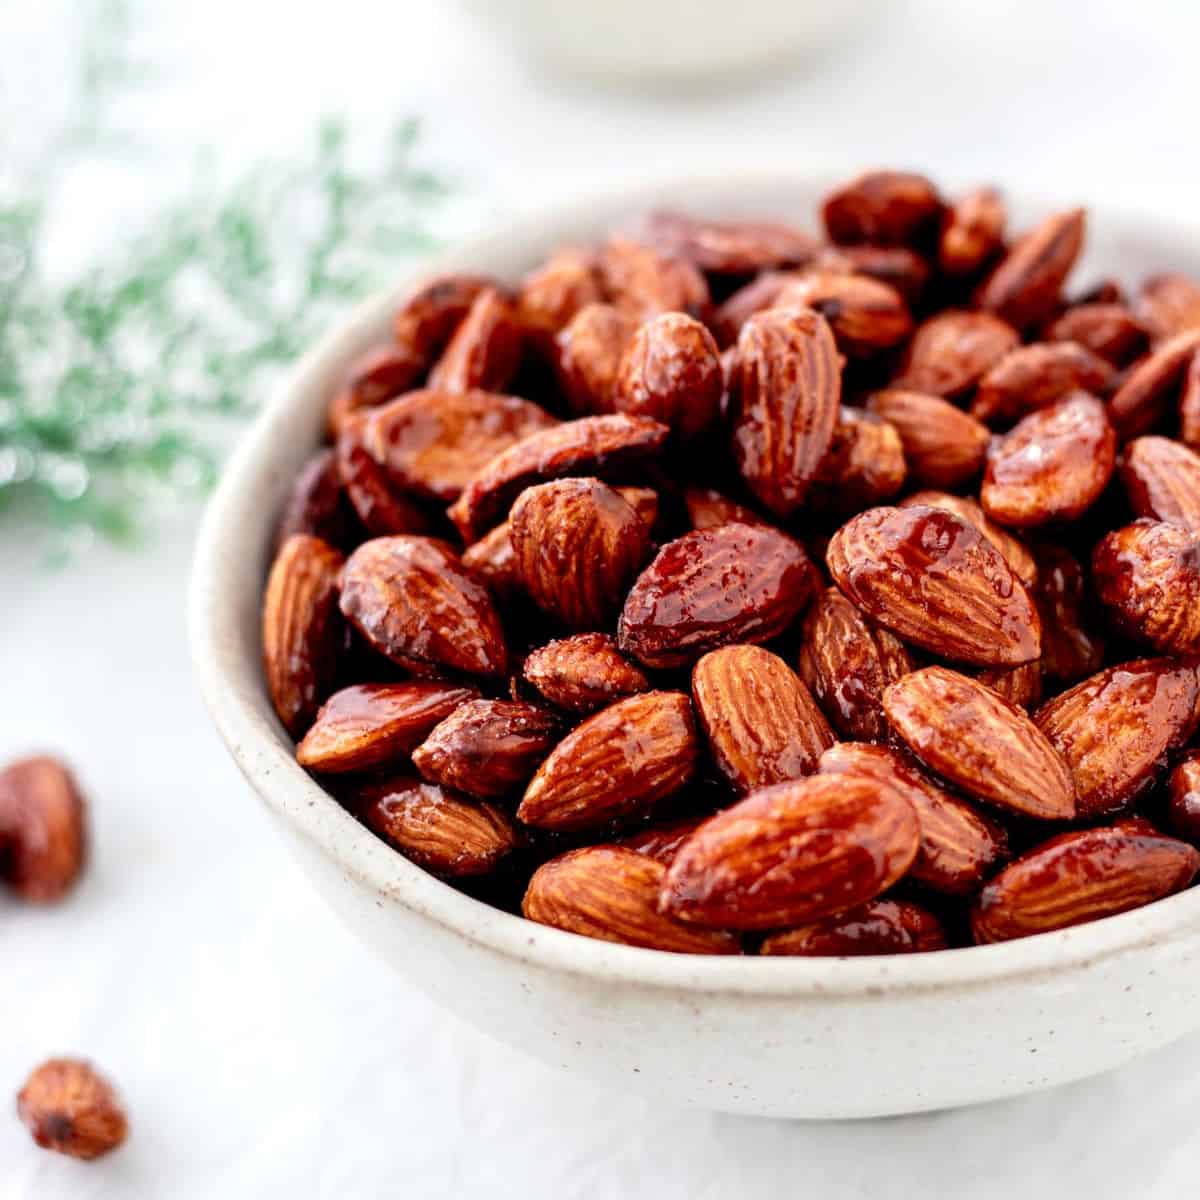 Cinnamon honey roasted almonds in a white bowl.